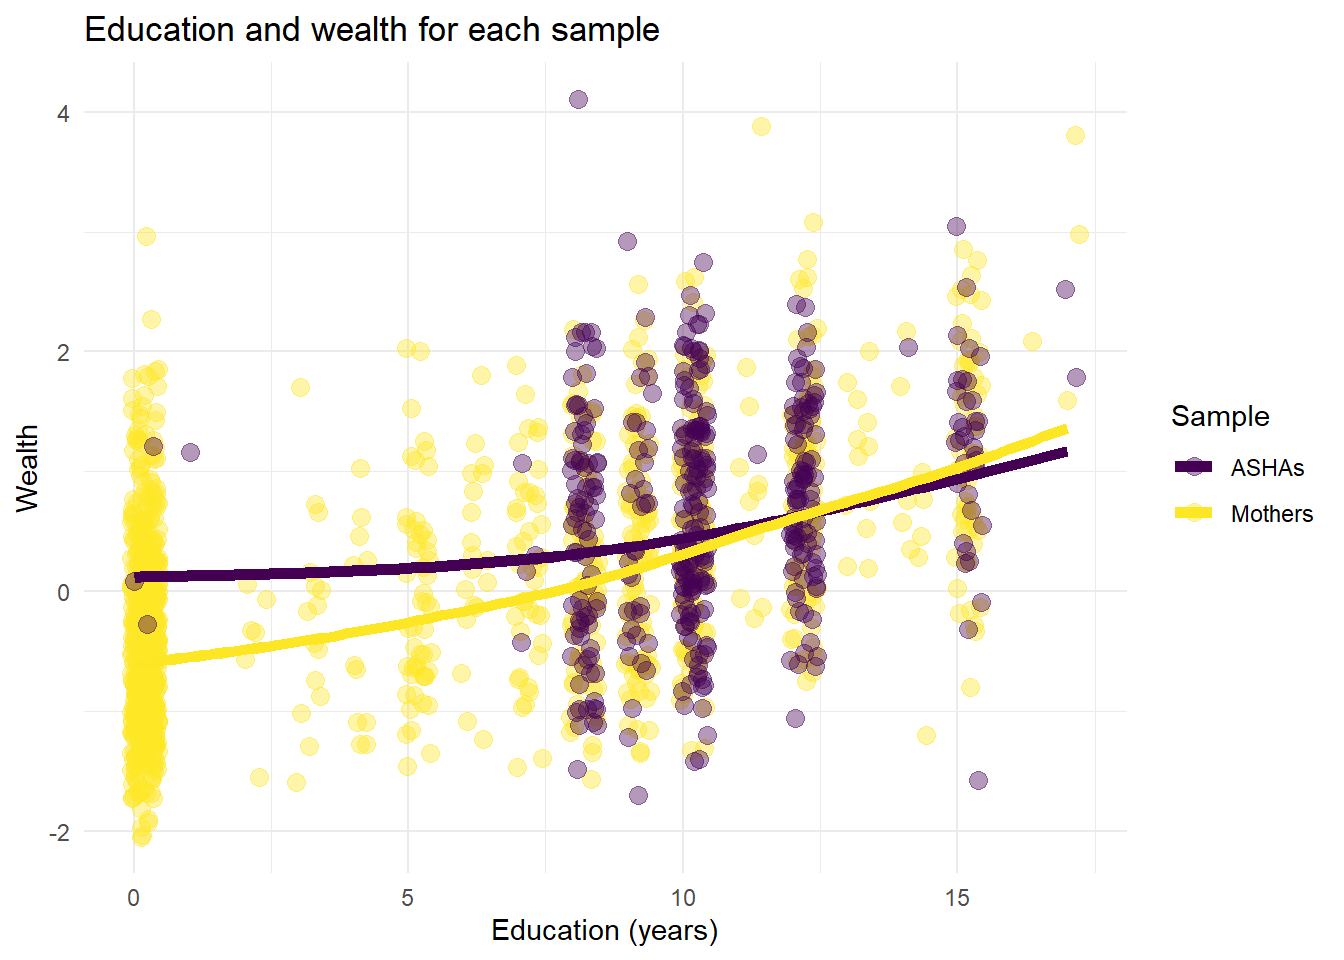 Education and Wealth: Comparing Mother and ASHA samples (all data).